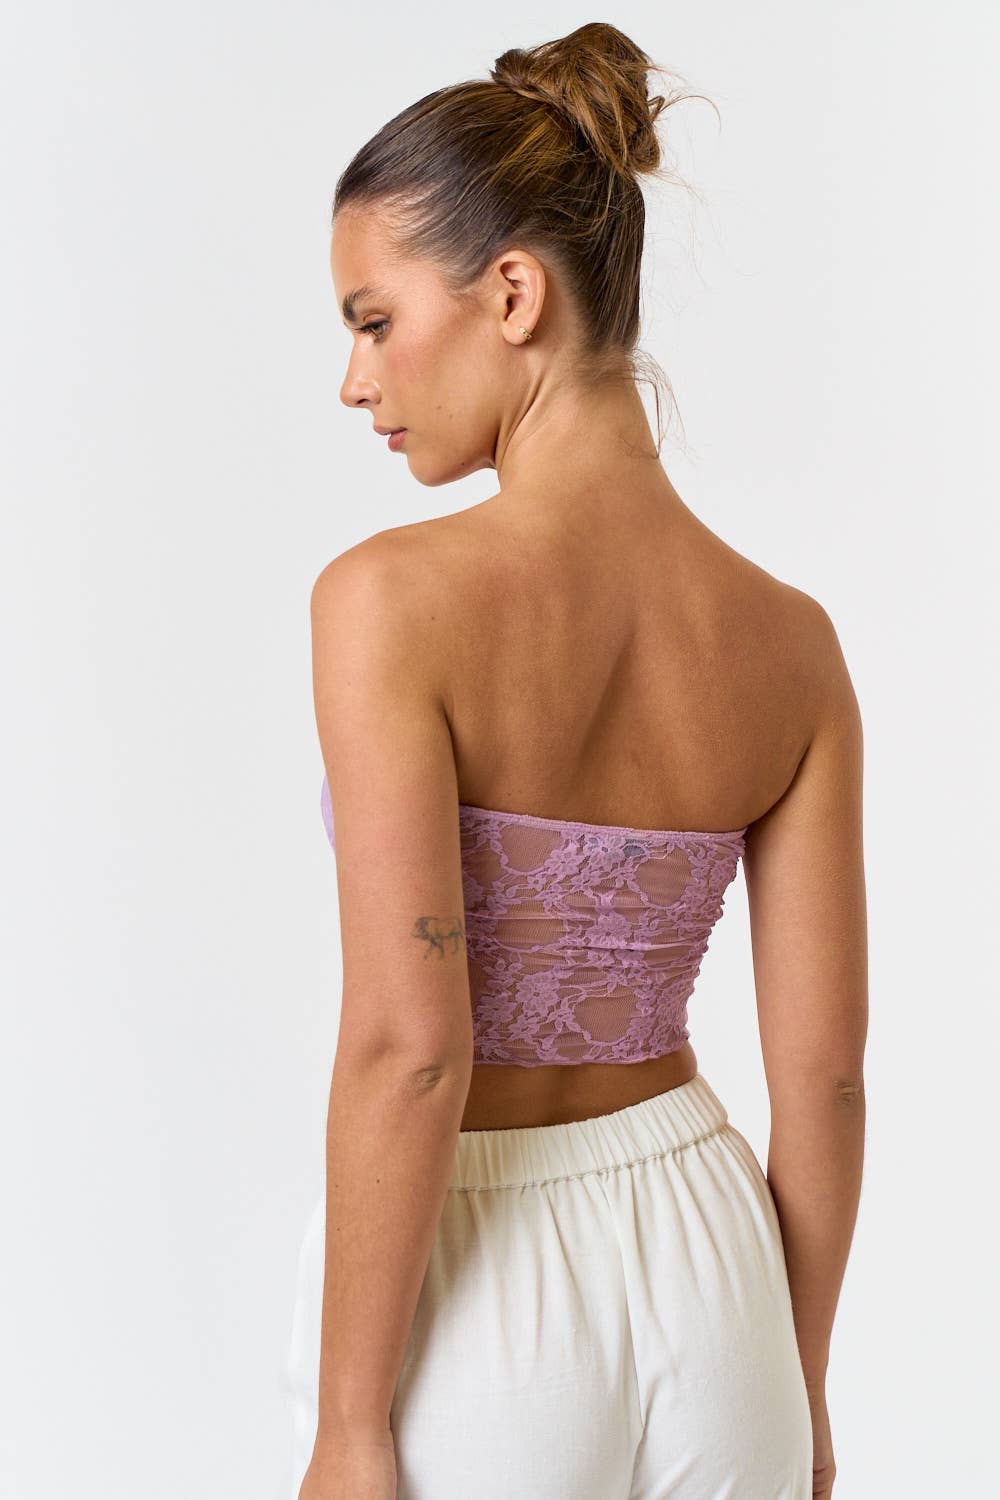 Blue Blush - BT21046-11 TWISTED FRONT LACE FLAYAWAY TUBE TOP: L / Off-White